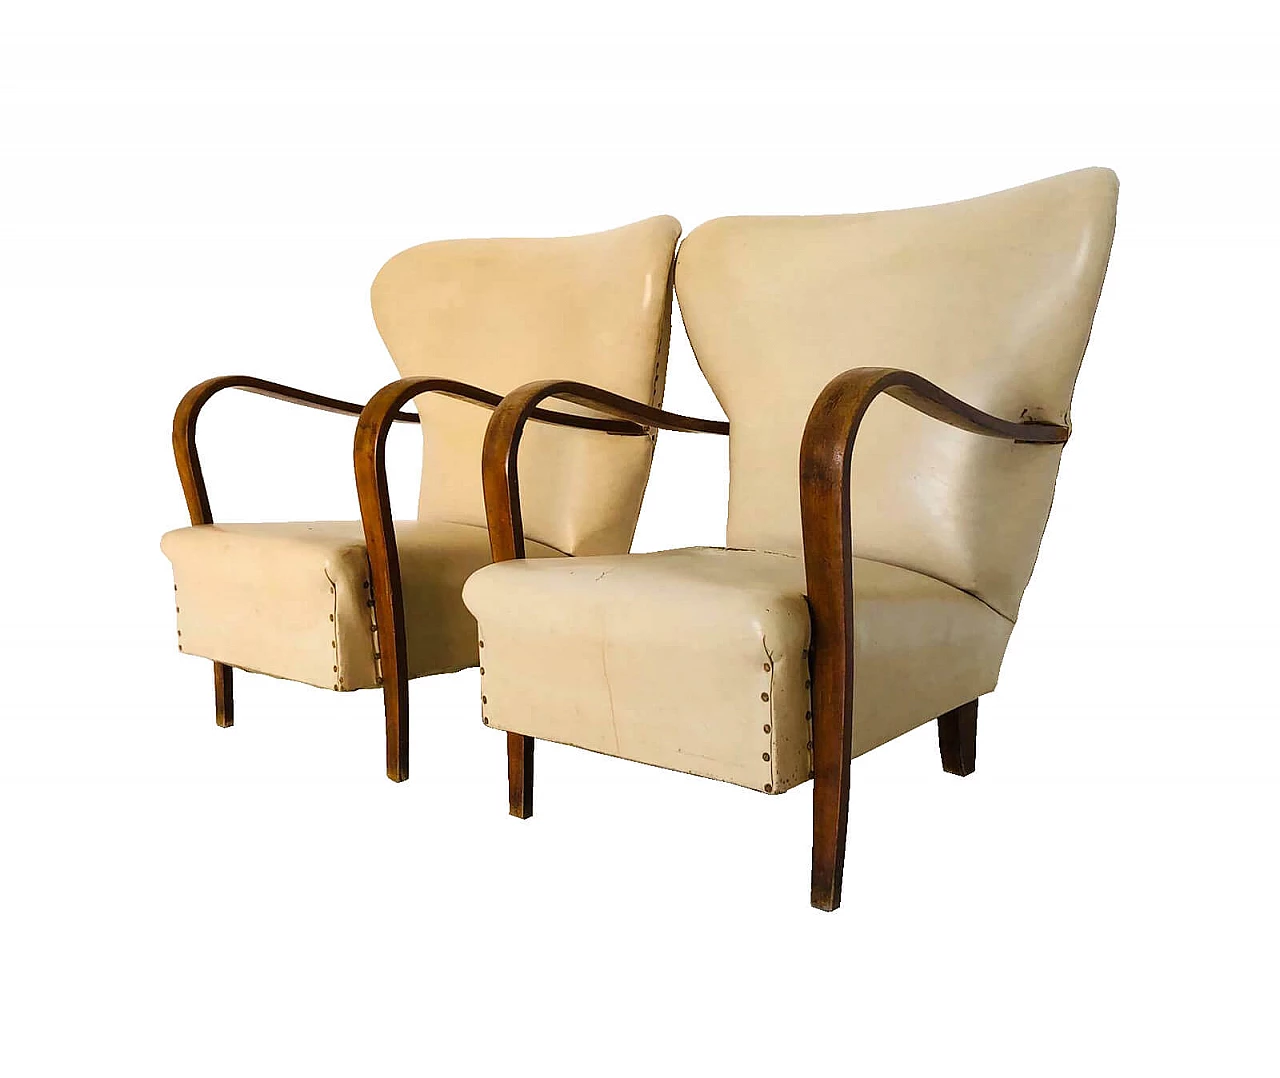 Pair of skai-lined armchairs, Guglielmo Ulrich style, 1950s 1068784